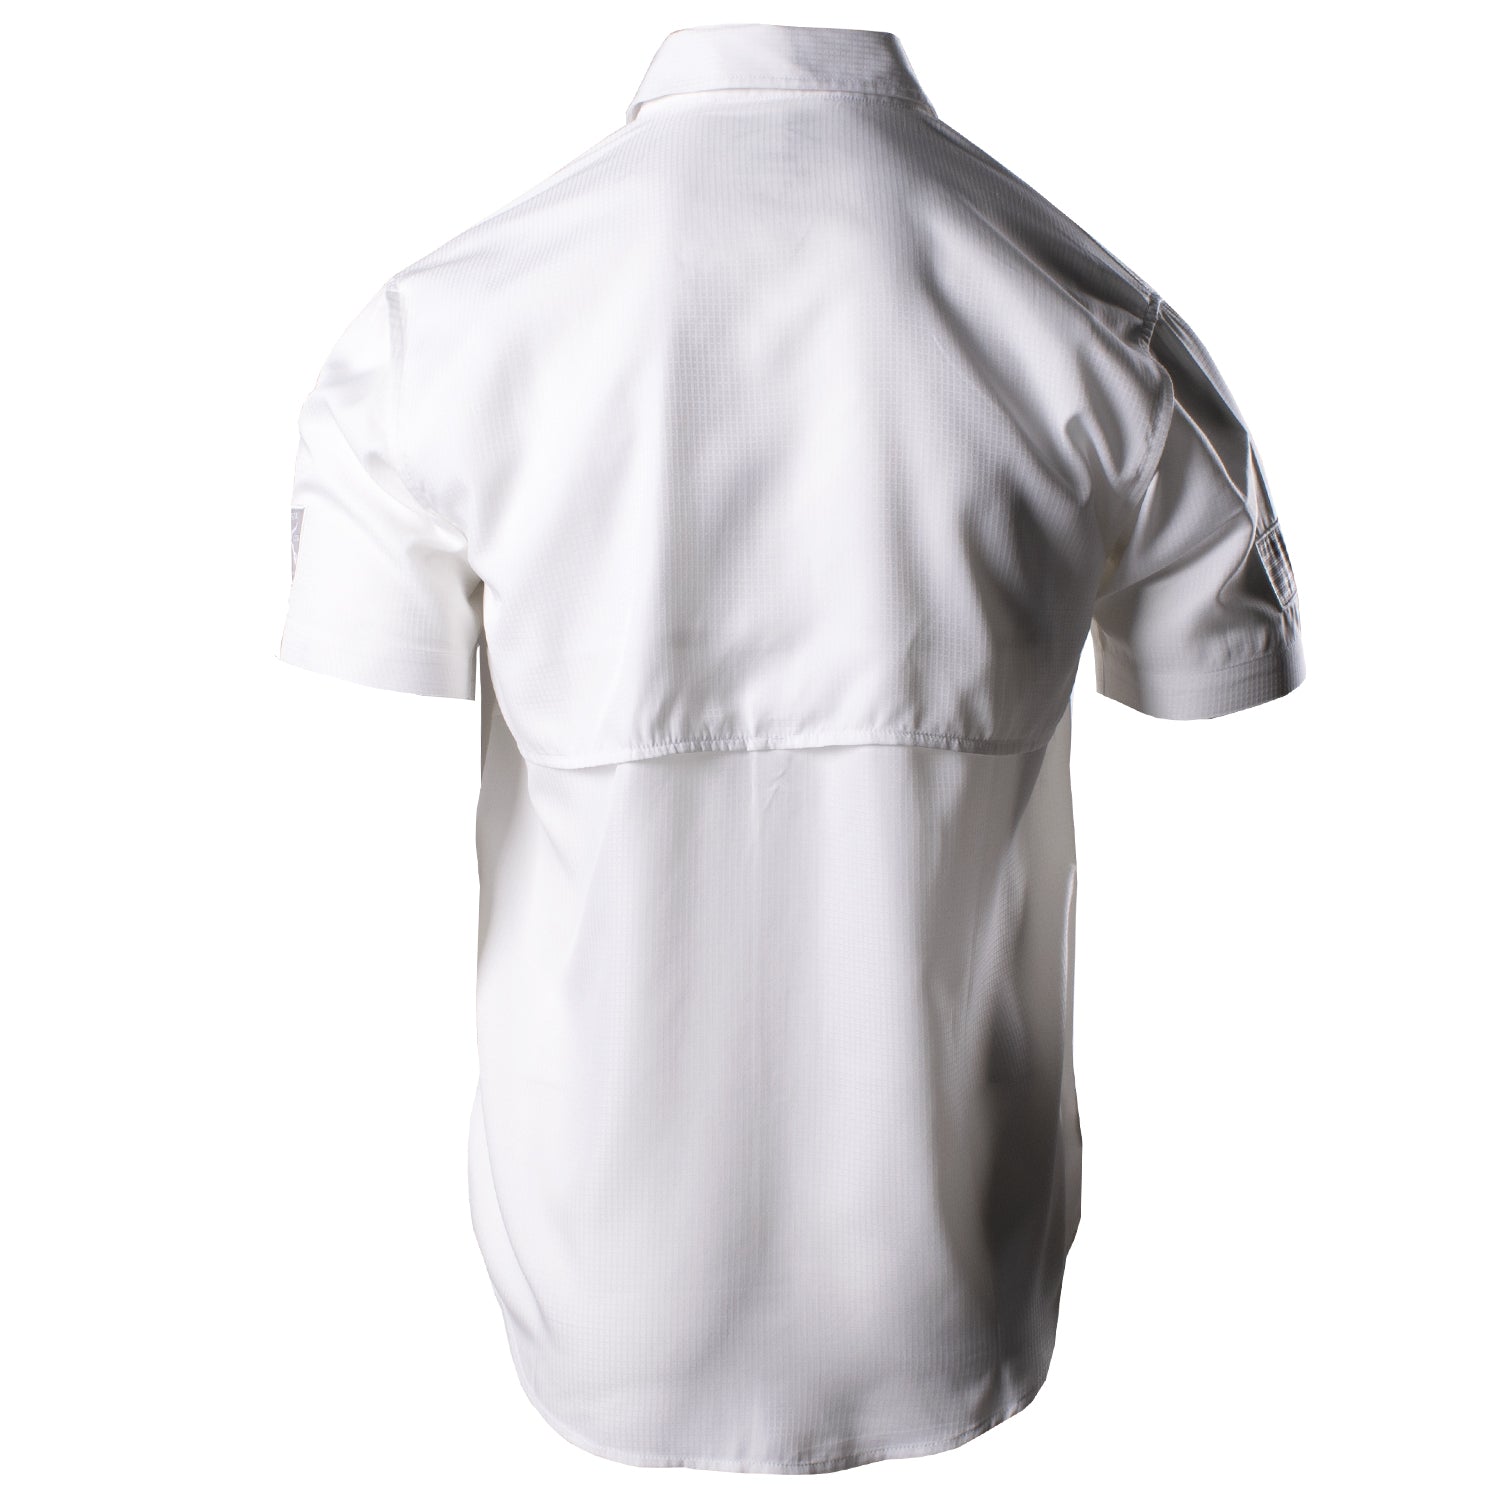 Back of the Grunt Style Short Sleeve Fishing Shirt in White that shows the back venting panel